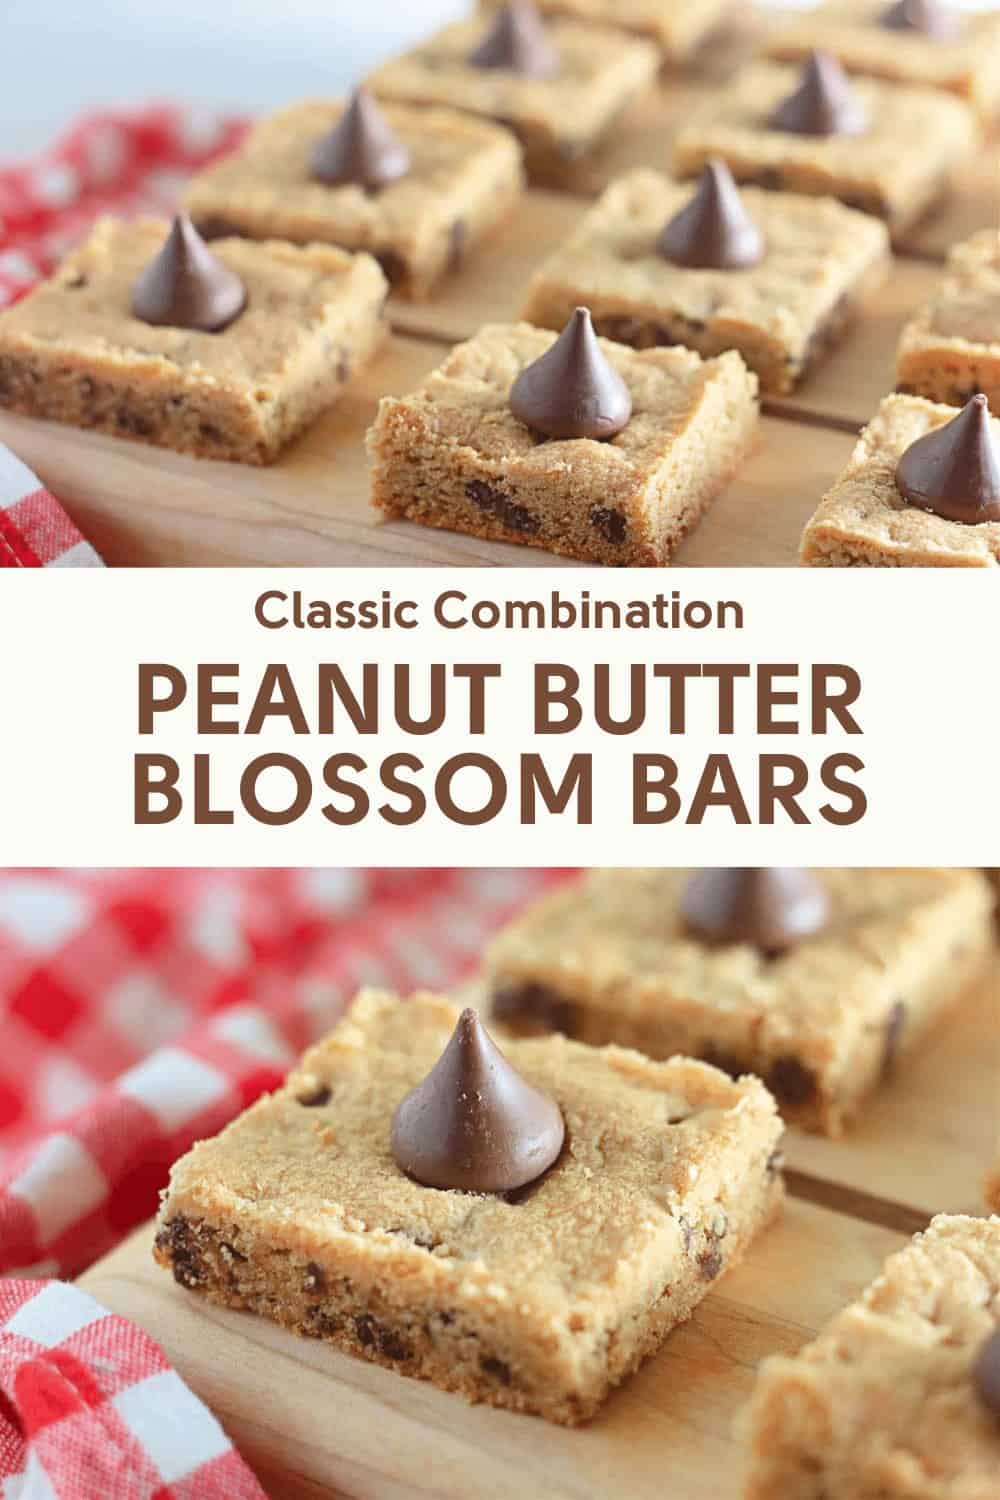 Peanut butter blossom bars arranged on a wooden surface with a caption "classic combination peanut butter blossom bars".